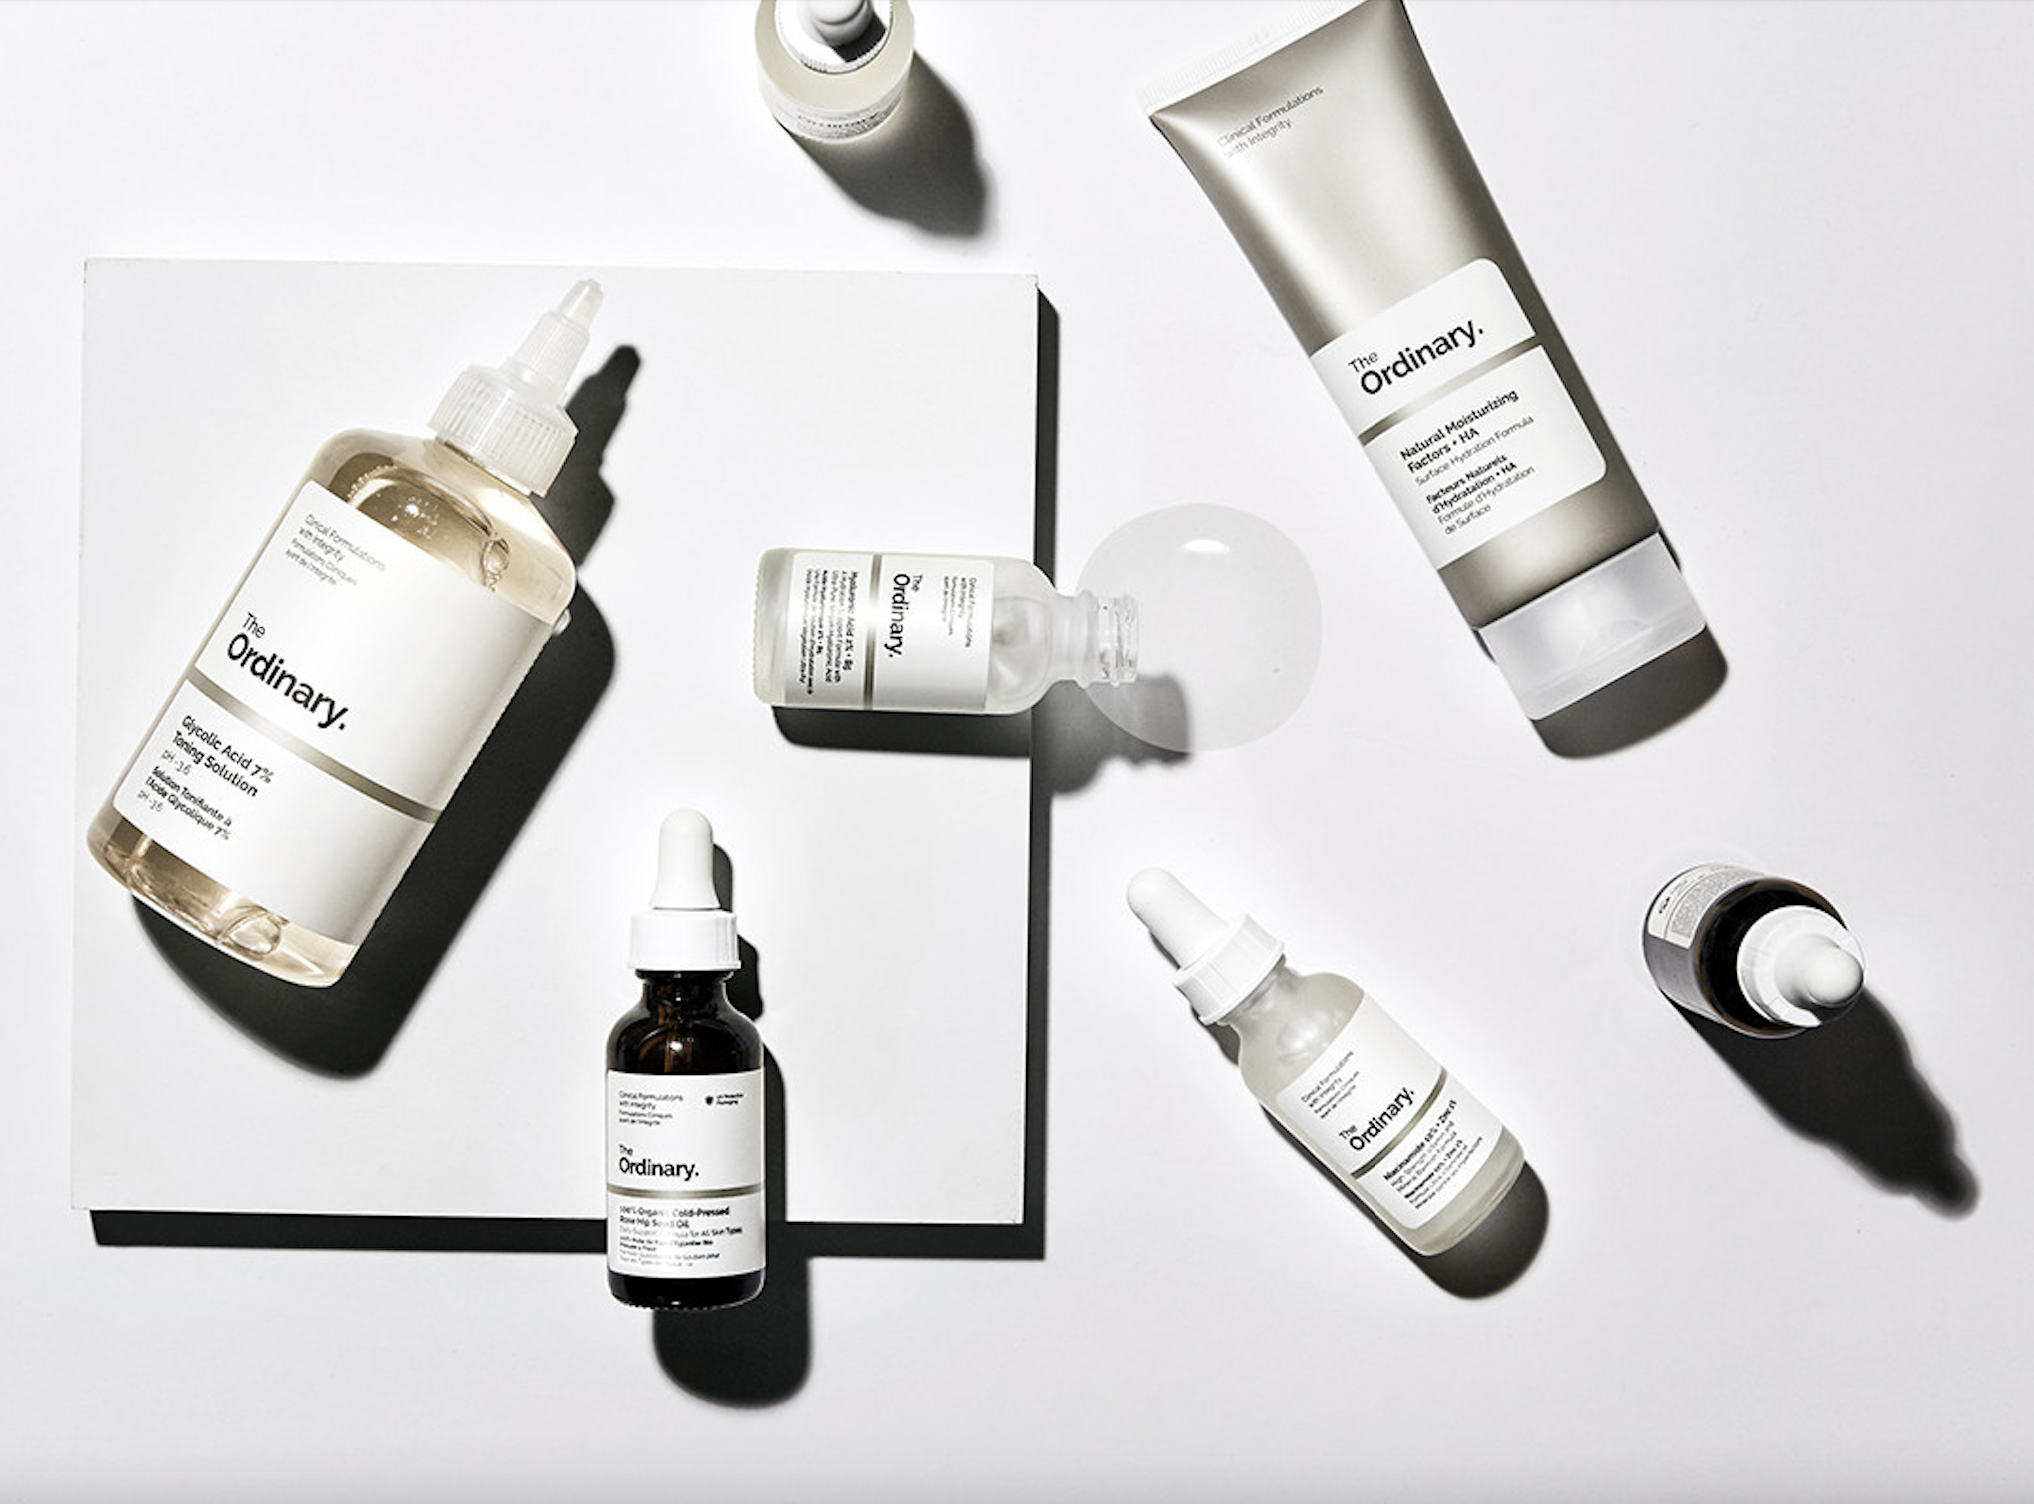 Estée Lauder Companies to acquire Deciem in two-phase deal by 2024